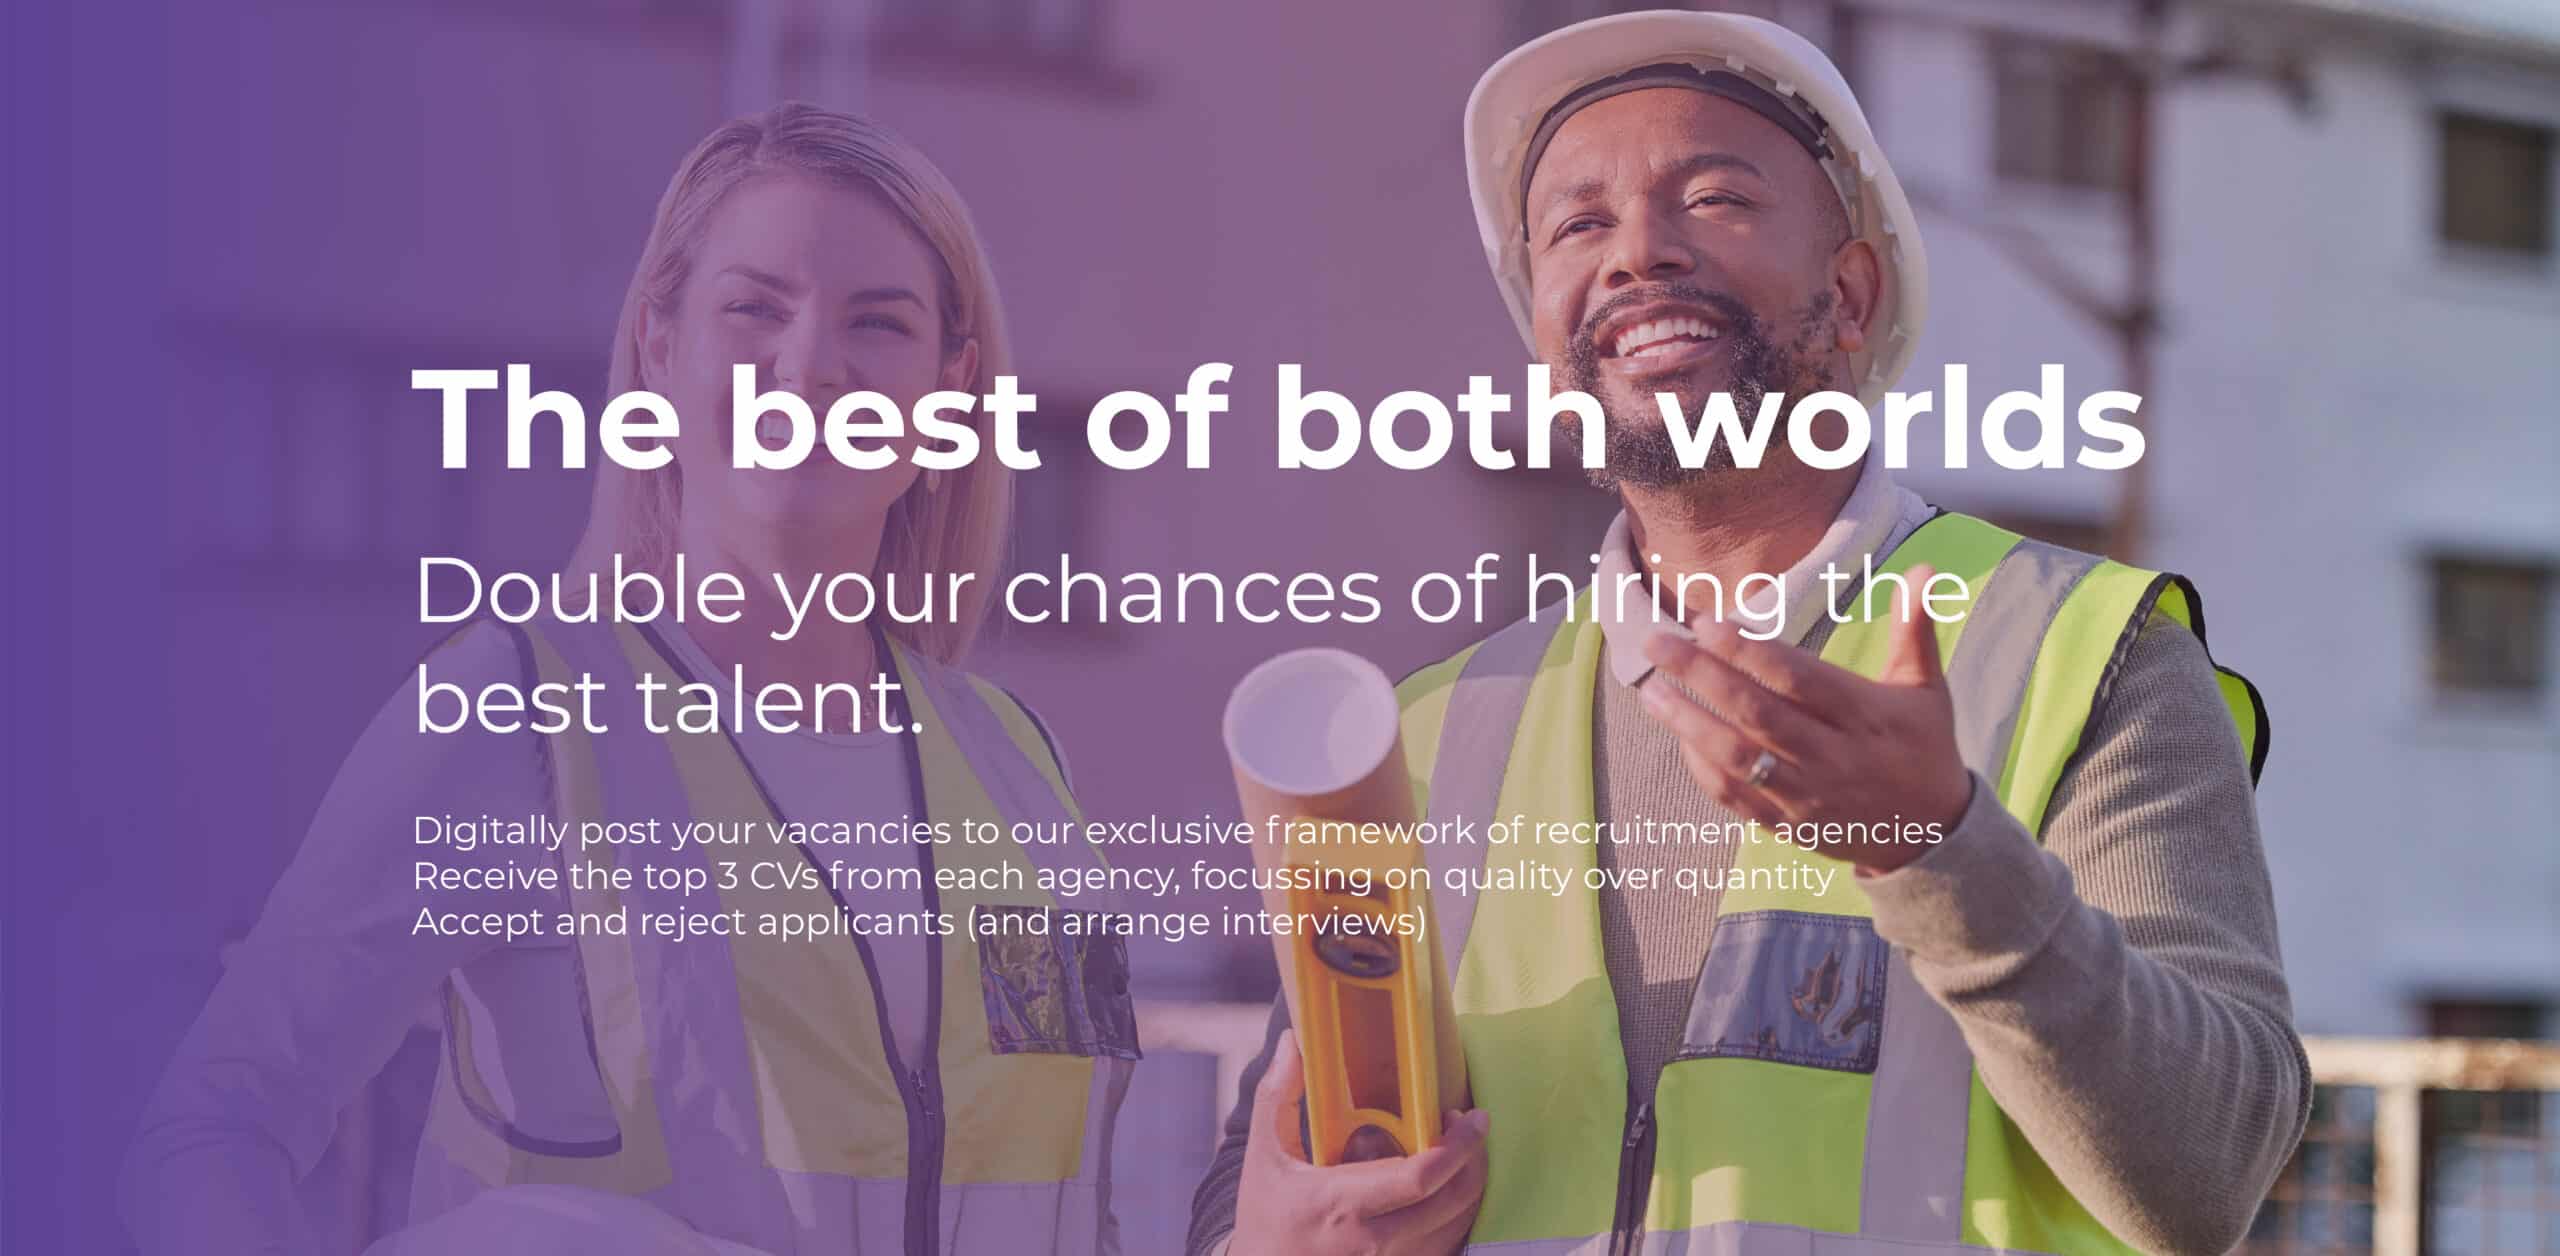 The best of both worlds - double your chances of hiring the best talent.